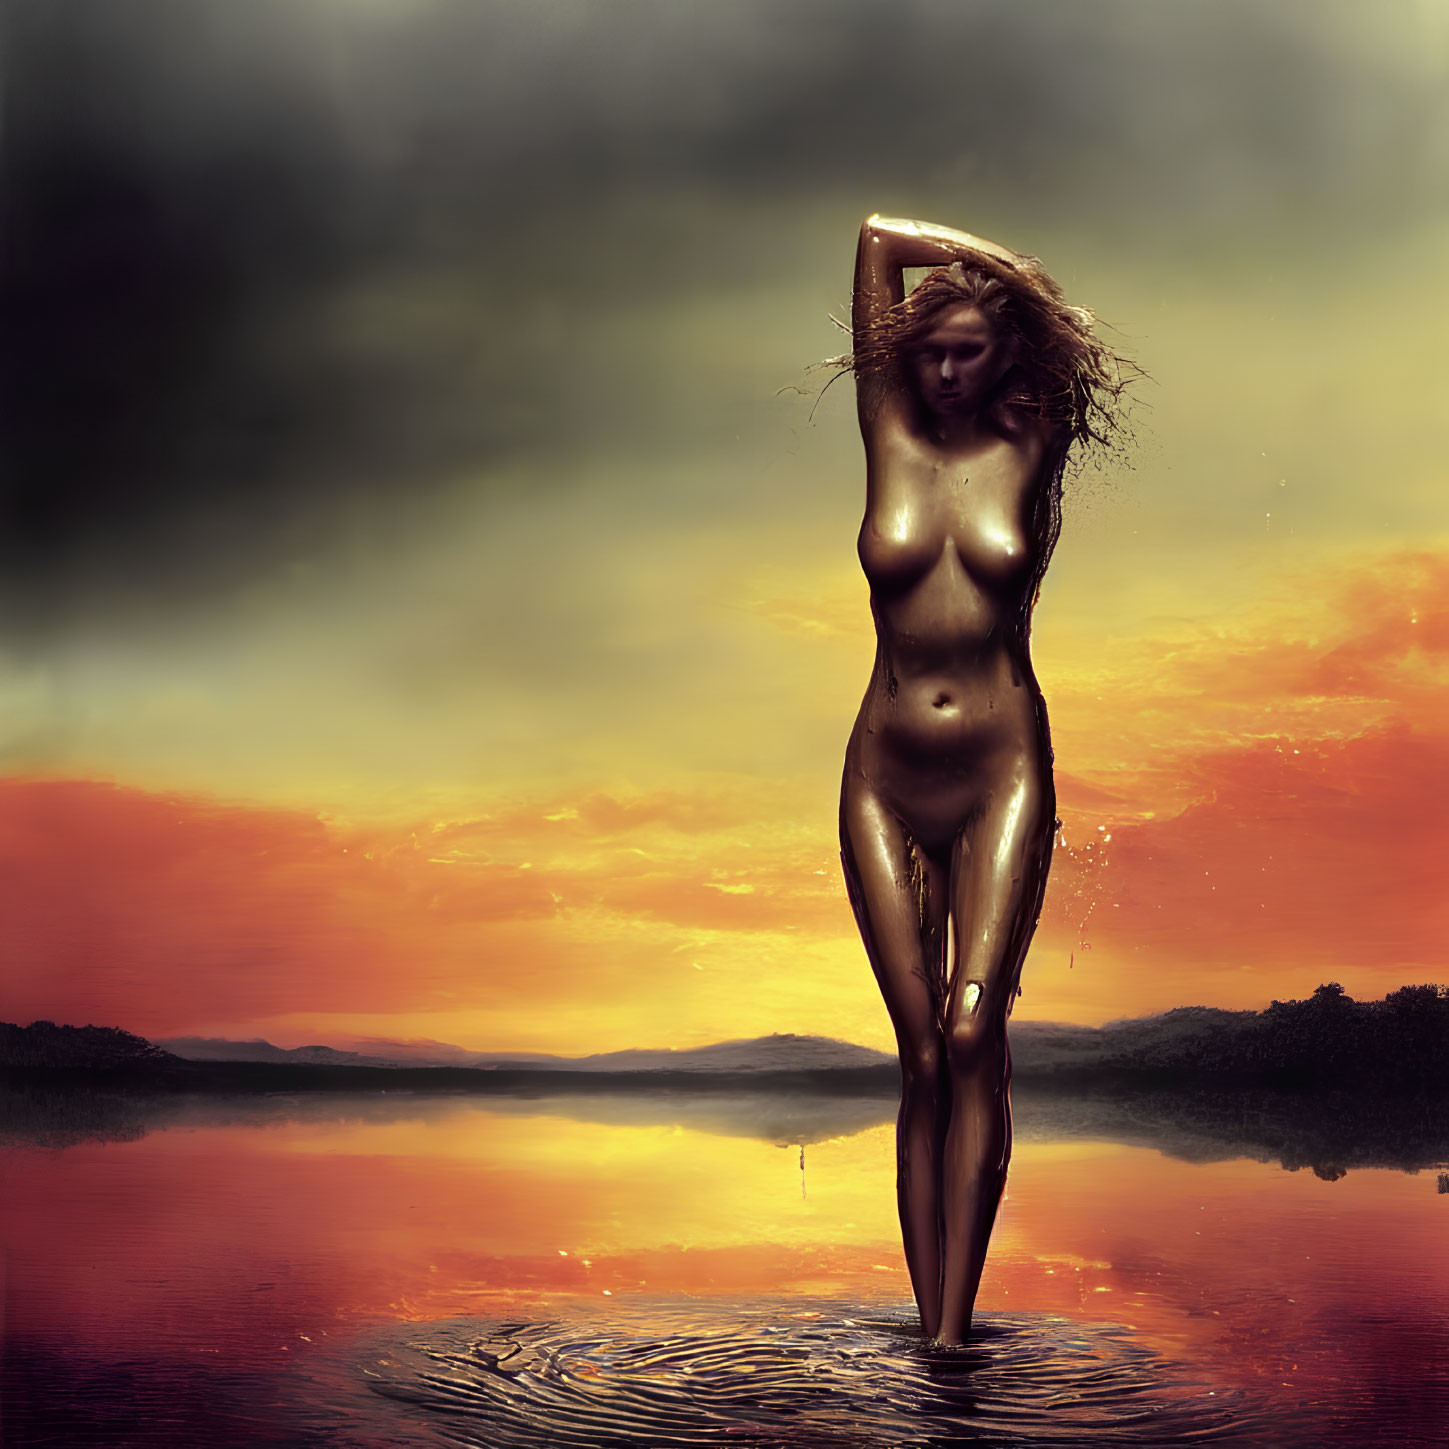 Golden woman figure standing in lake at sunset with glowing reflections